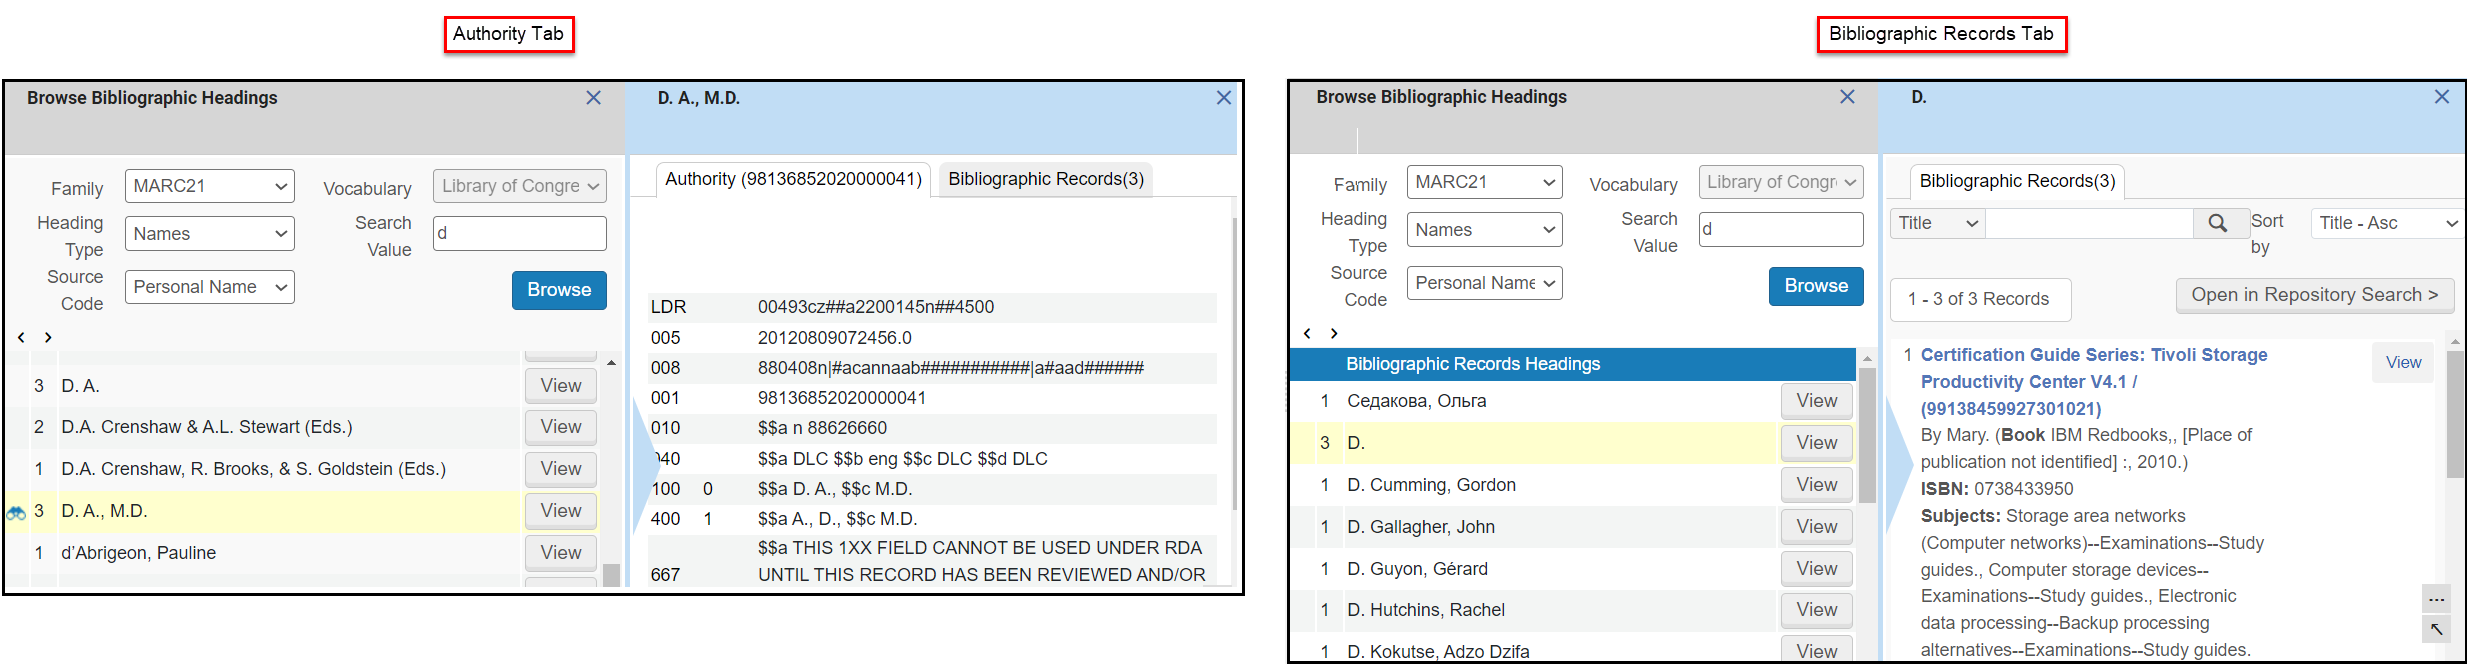 Browse BIB Headings displaying both Authority and Bibliographic Records tabs